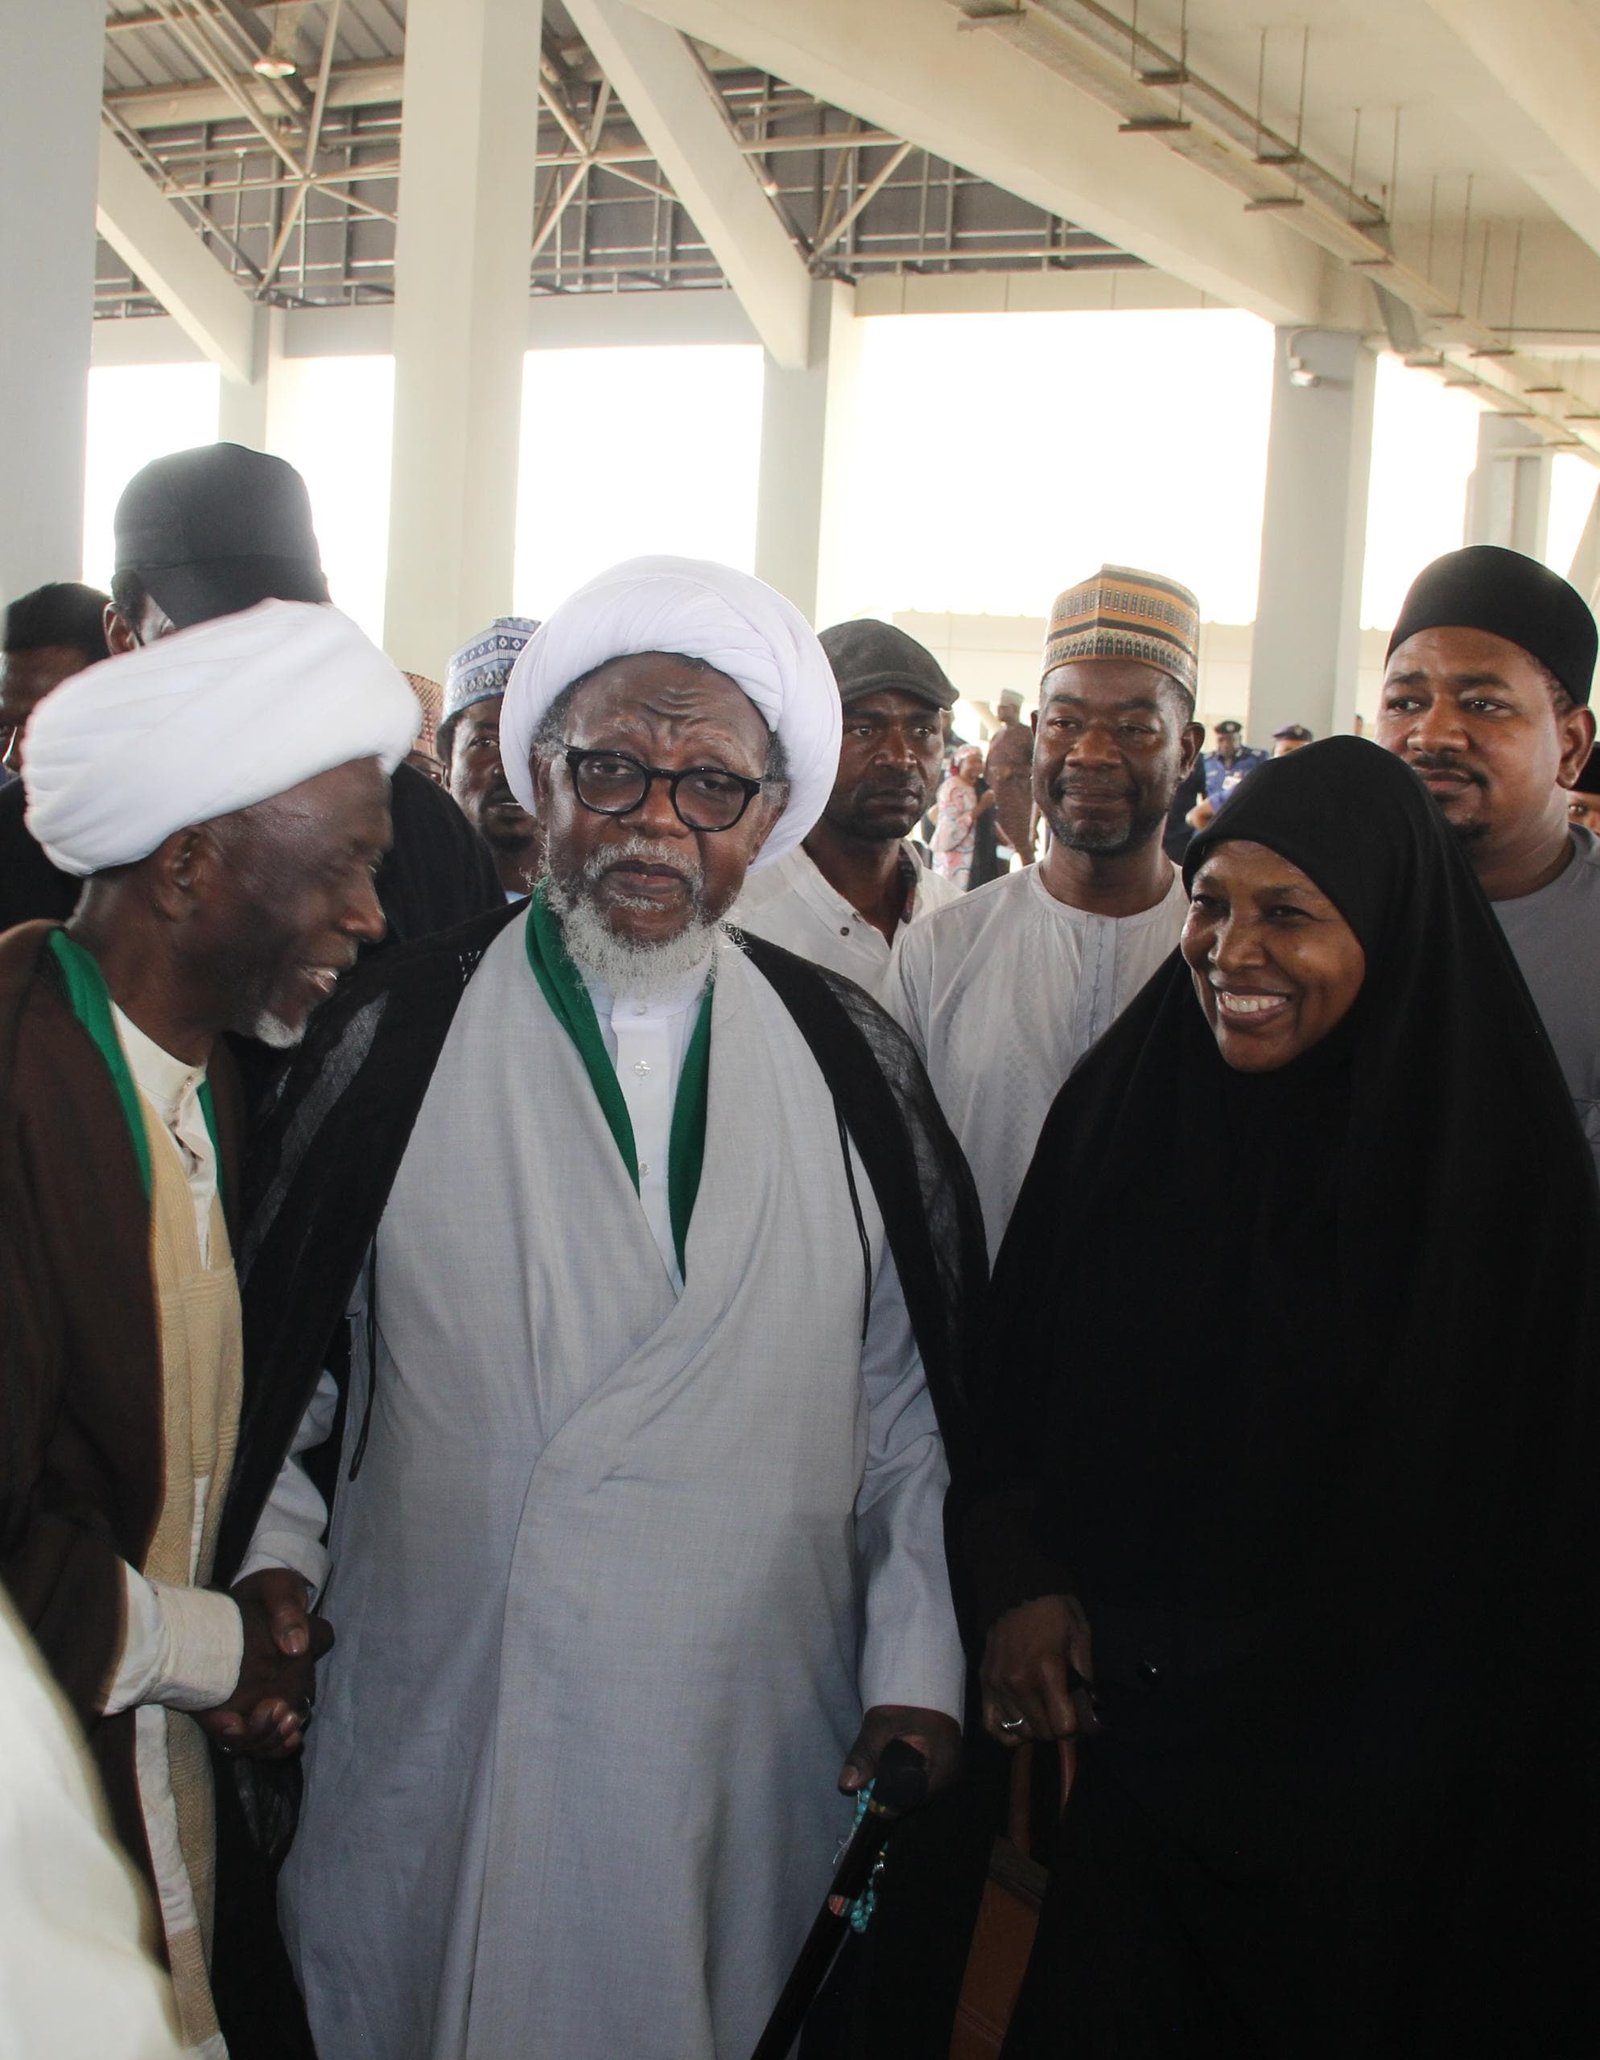 El-Zakzaky, wife return to Nigeria after medical trip abroad amidst rousing welcome